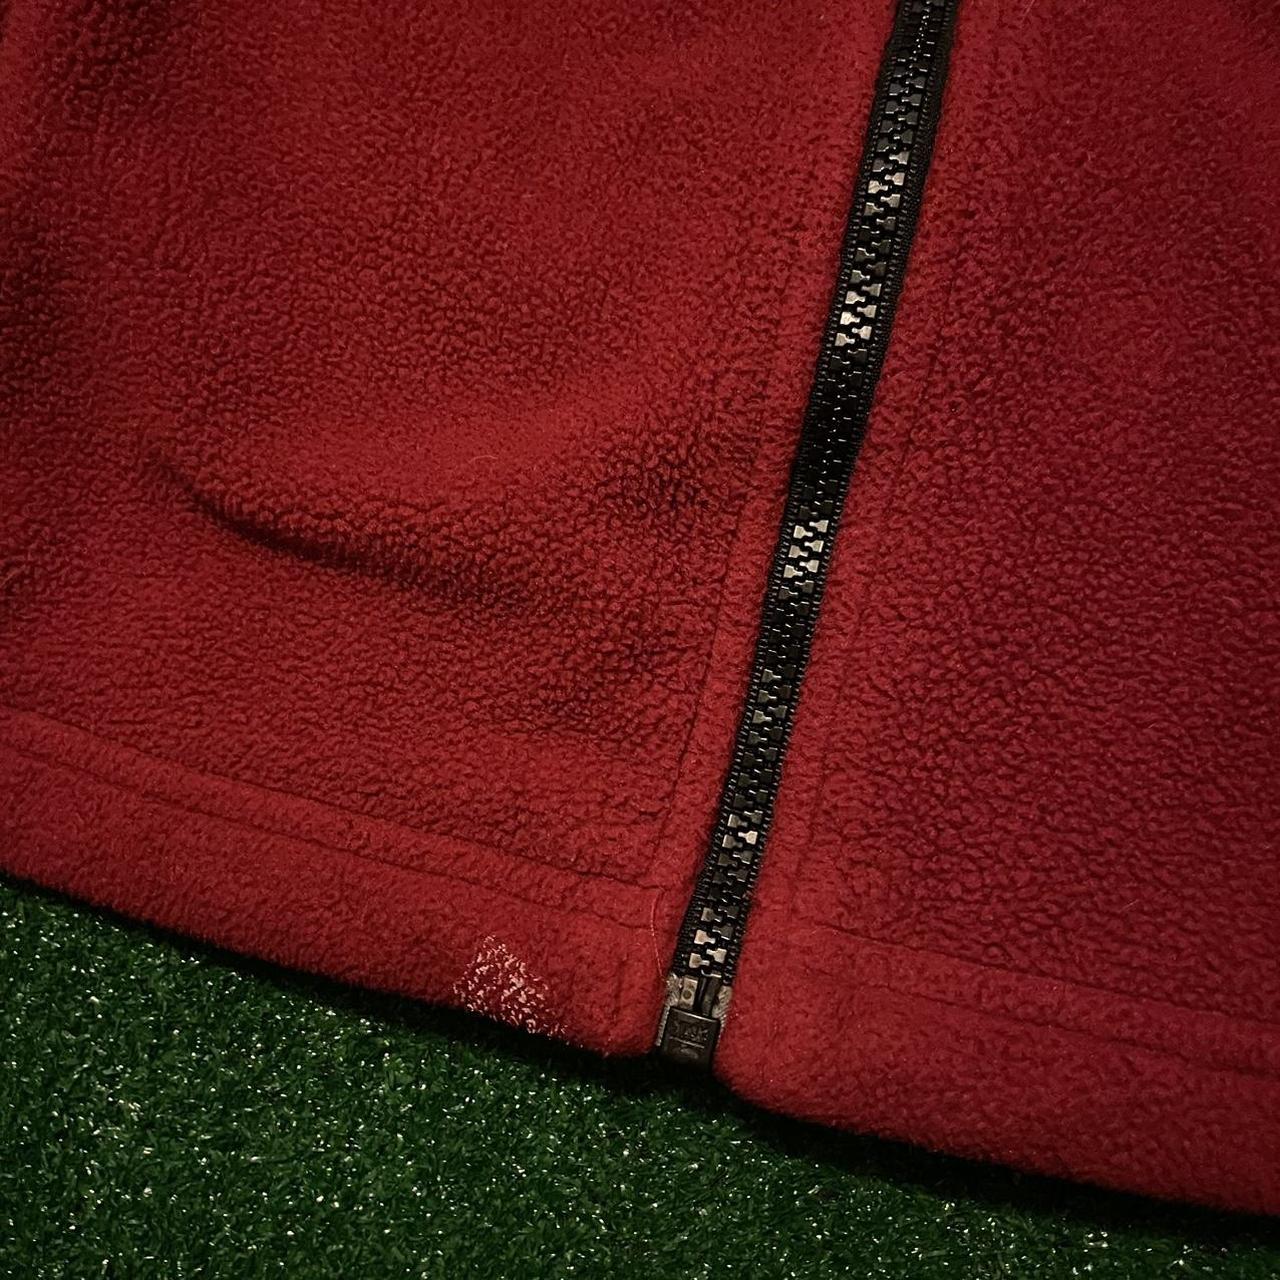 The North Face Men's Red and Black Jacket (4)